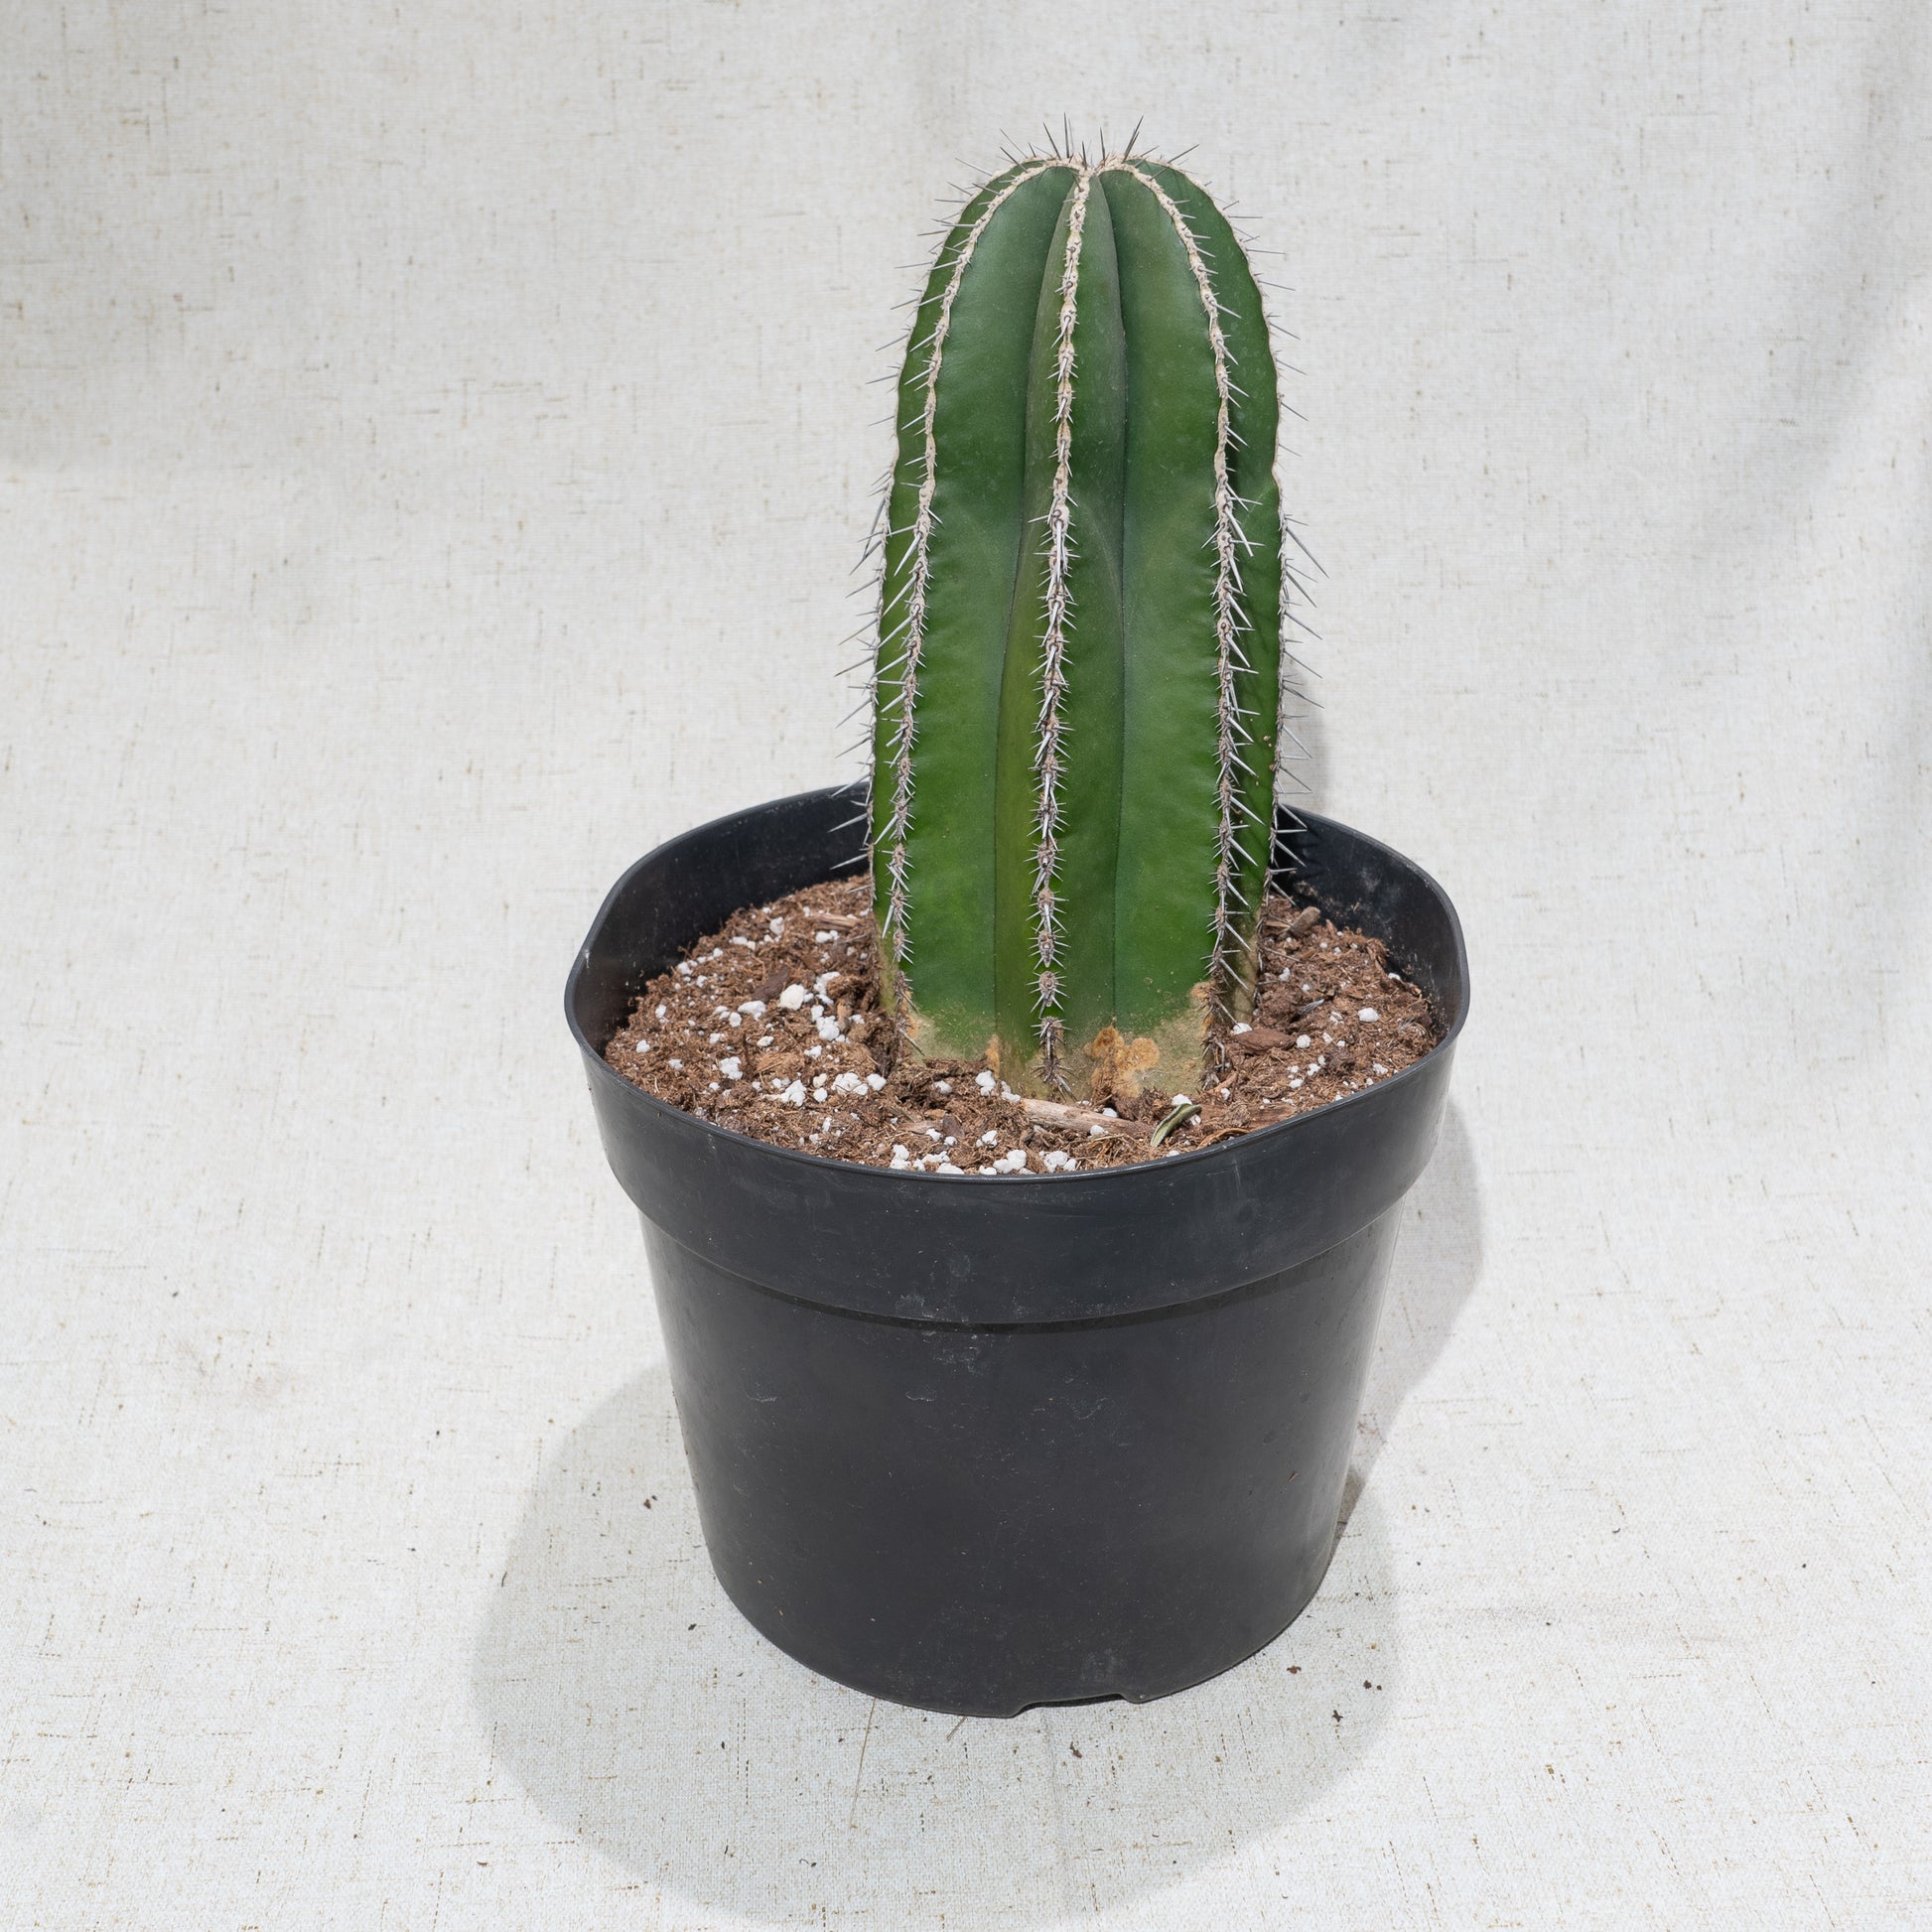 Mexican Fence Post Cactus (Lophocereus marginatus) in a 8 inch pot. Indoor plant for sale by Promise Supply for delivery and pickup in Toronto